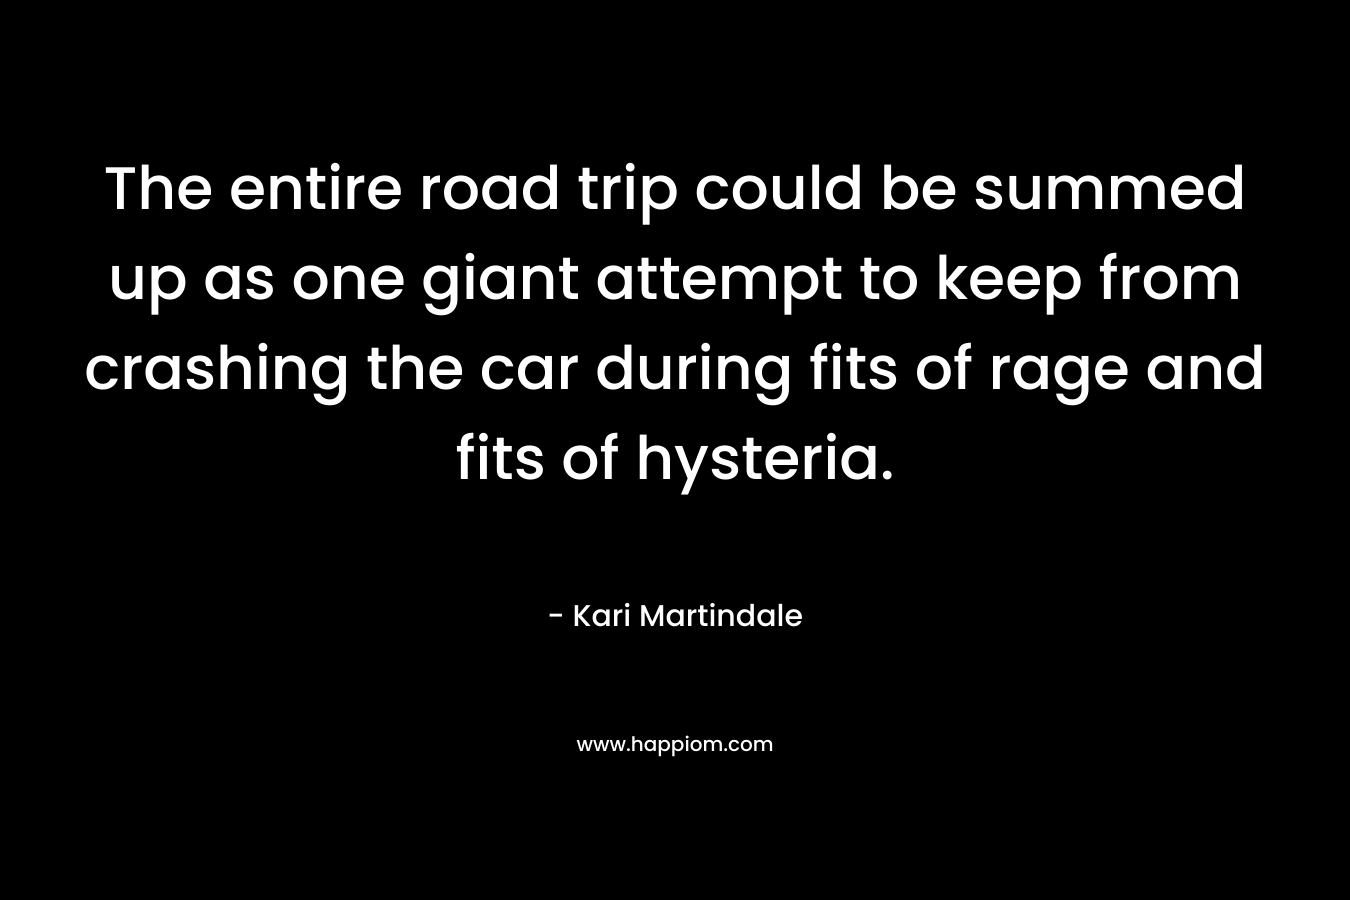 The entire road trip could be summed up as one giant attempt to keep from crashing the car during fits of rage and fits of hysteria. – Kari Martindale